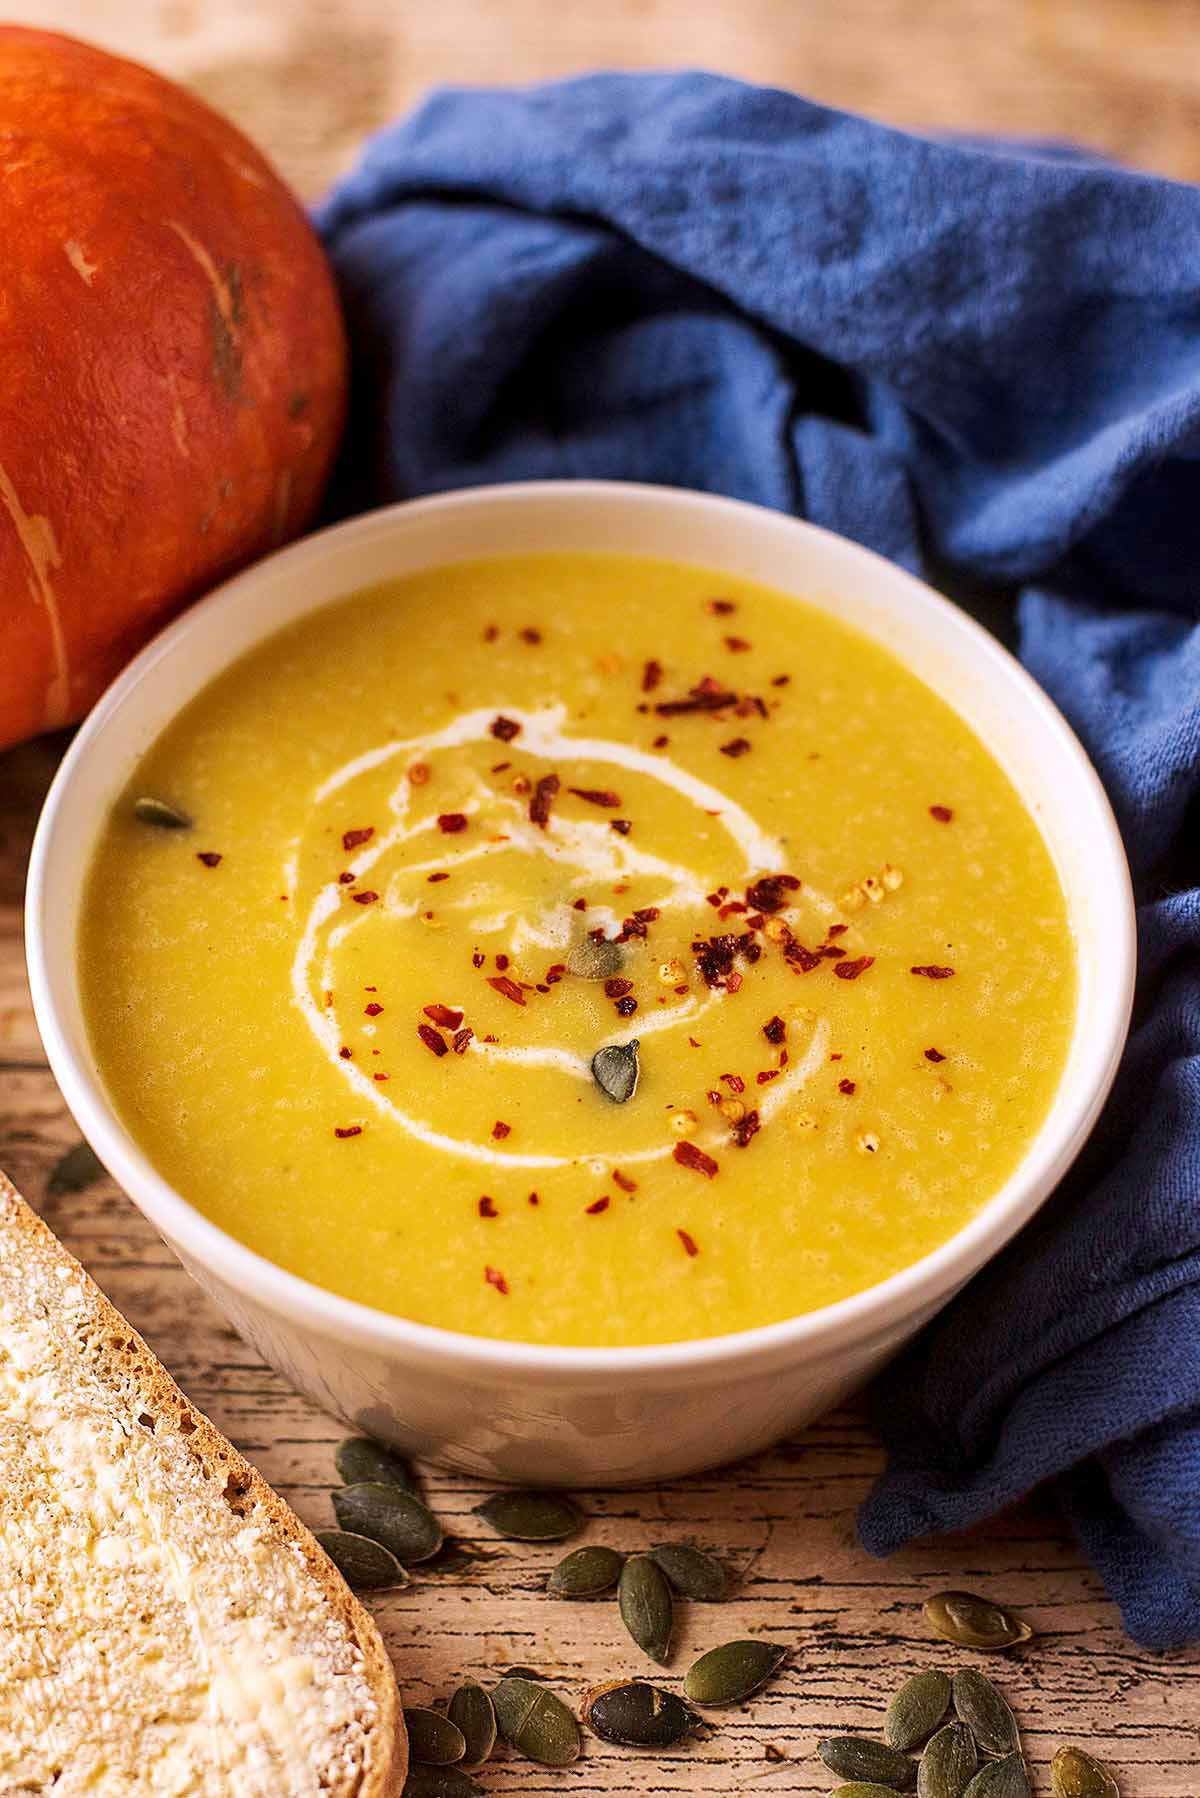 Pumpkin soup in a bowl in front of a blue towel.